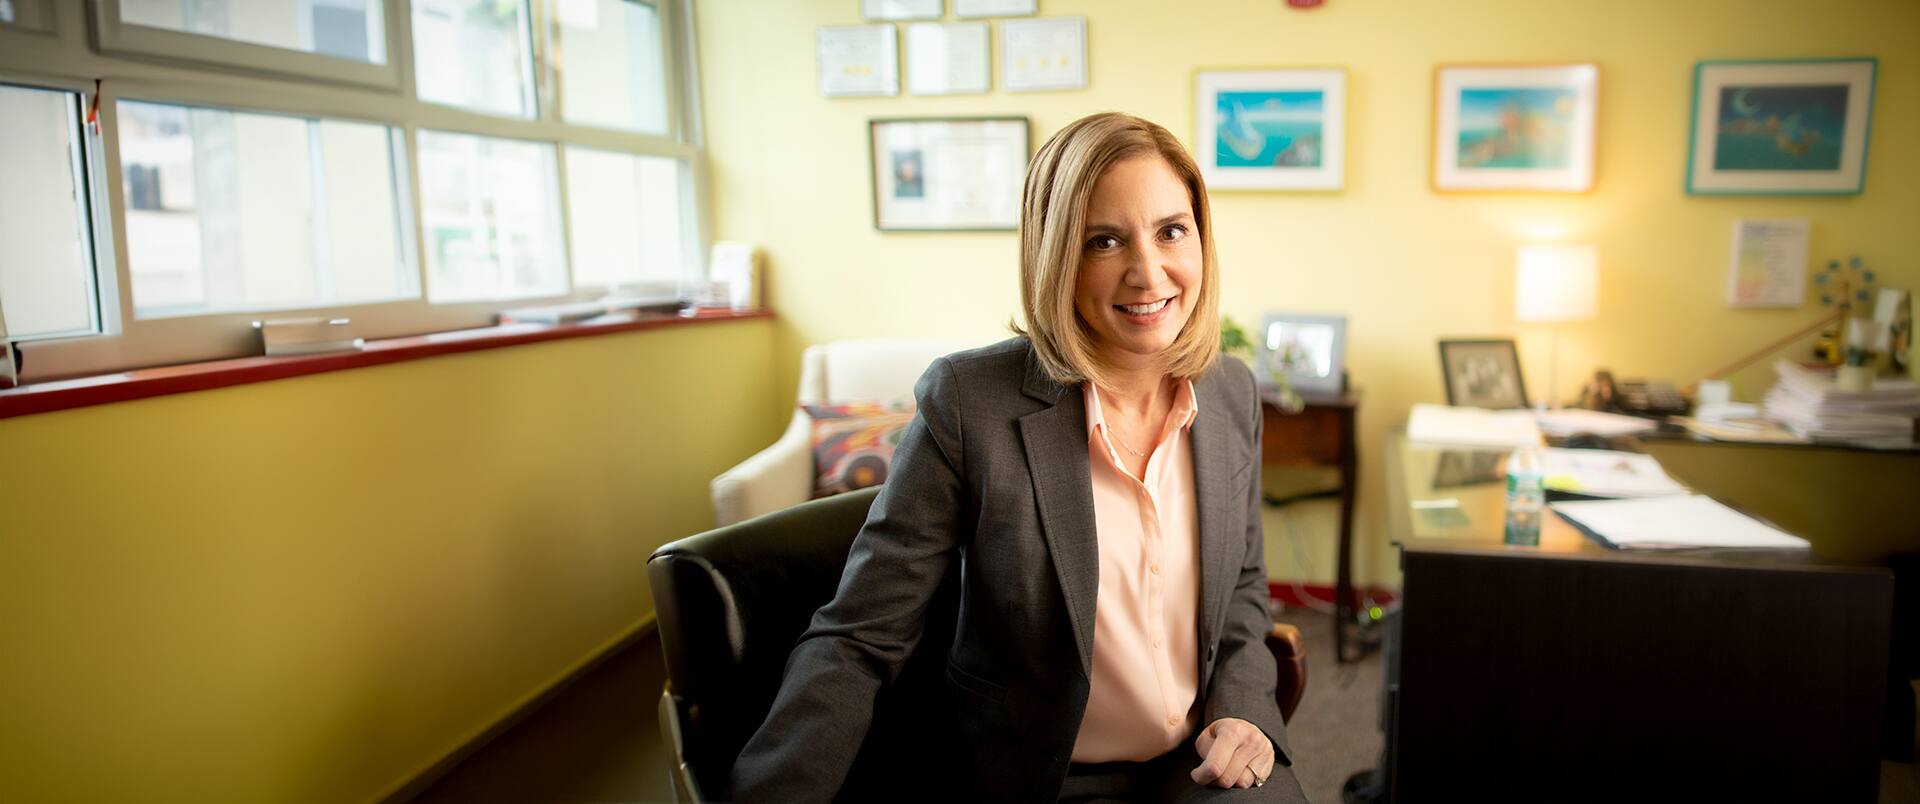 Marti Ilg, who earned her degree from SNHU in 2014, wearing a peach colored blouse and  dark blazer sitting in a swivel chair next to a desk in her office.